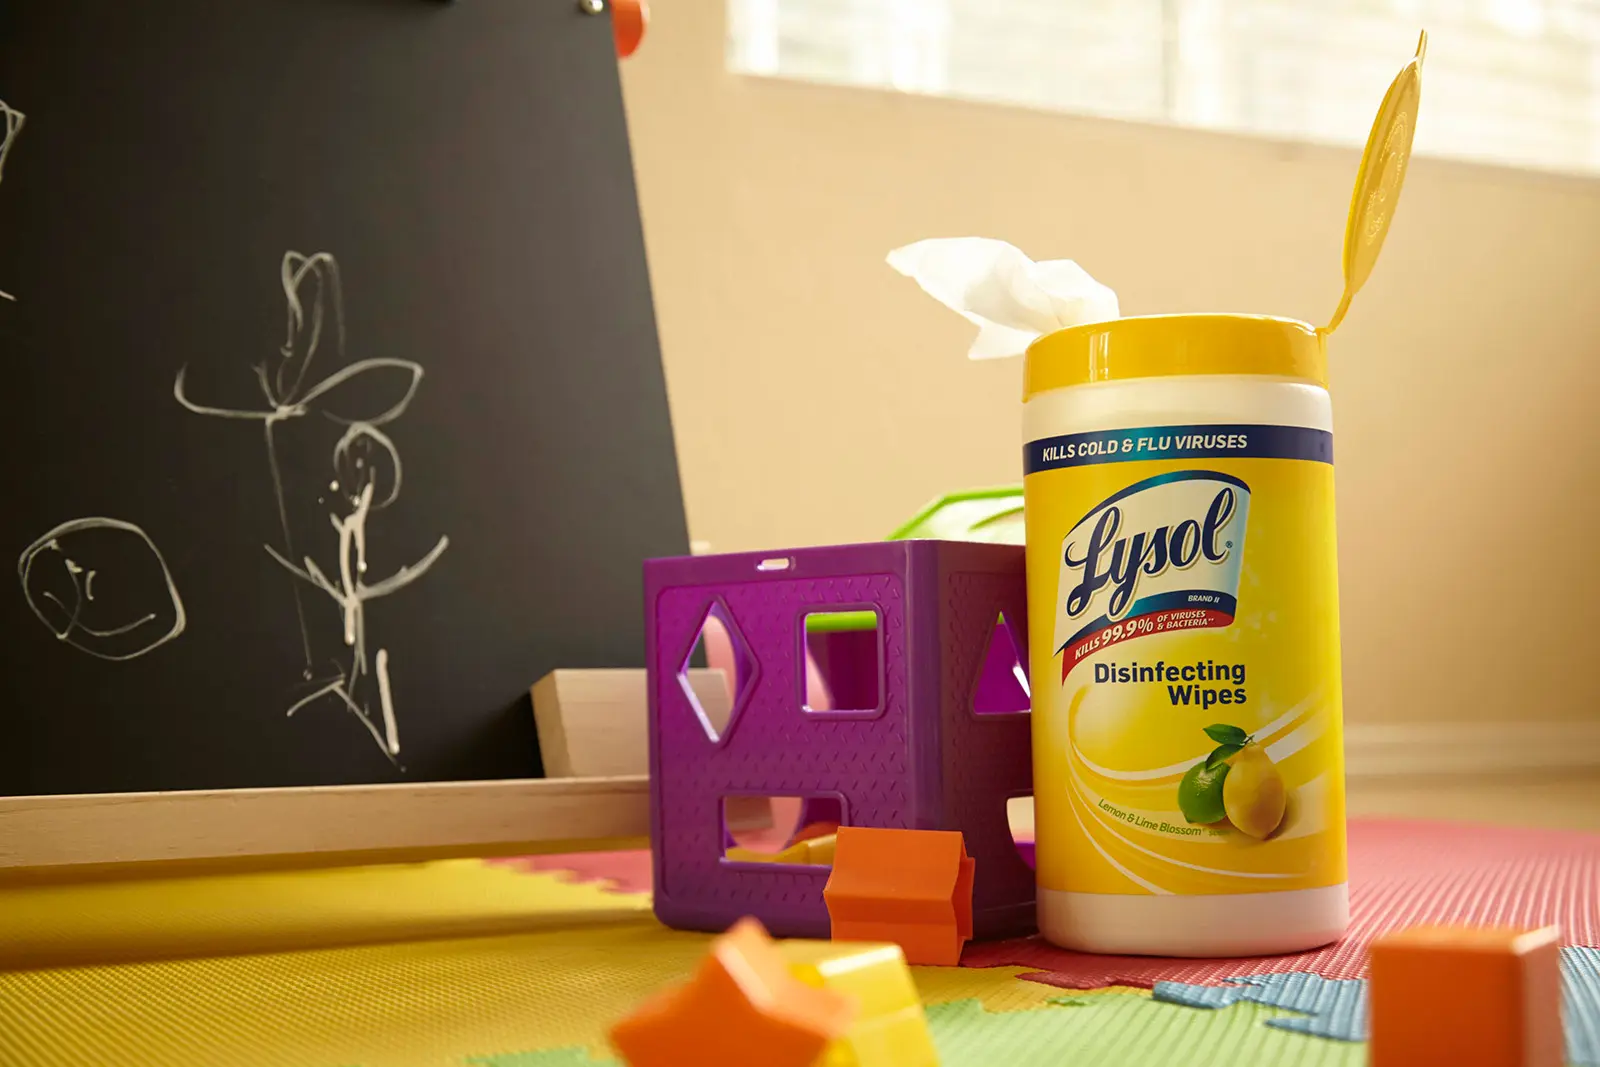 Canister of Lysol Disinfecting wipes on colorful foam floor next to toys and blackboard with chalk drawings